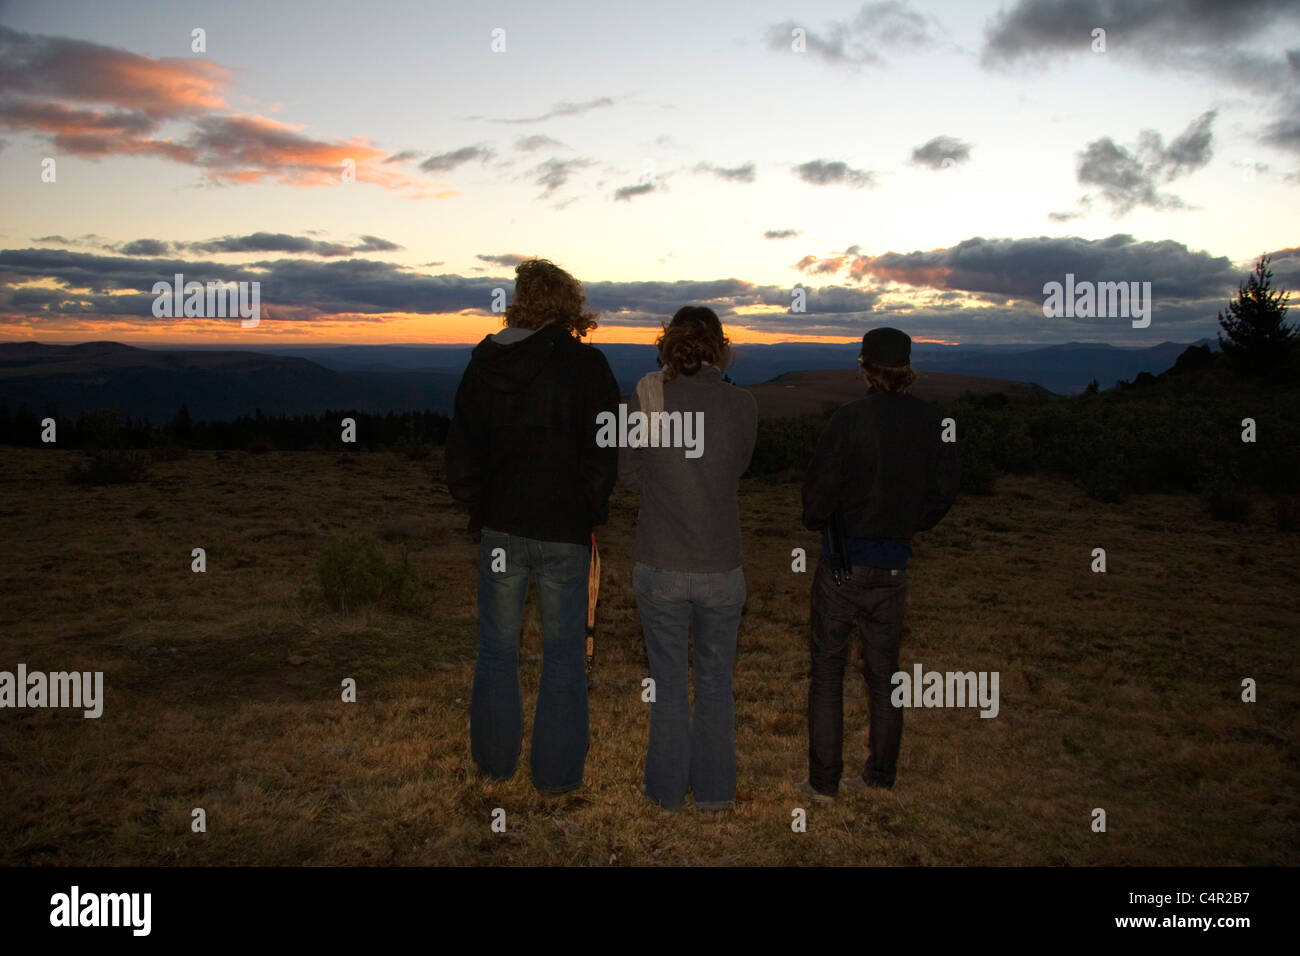 Three people viewing sunset in field by Hogsback Mountain, Amatola Mountains of South Africa Stock Photo